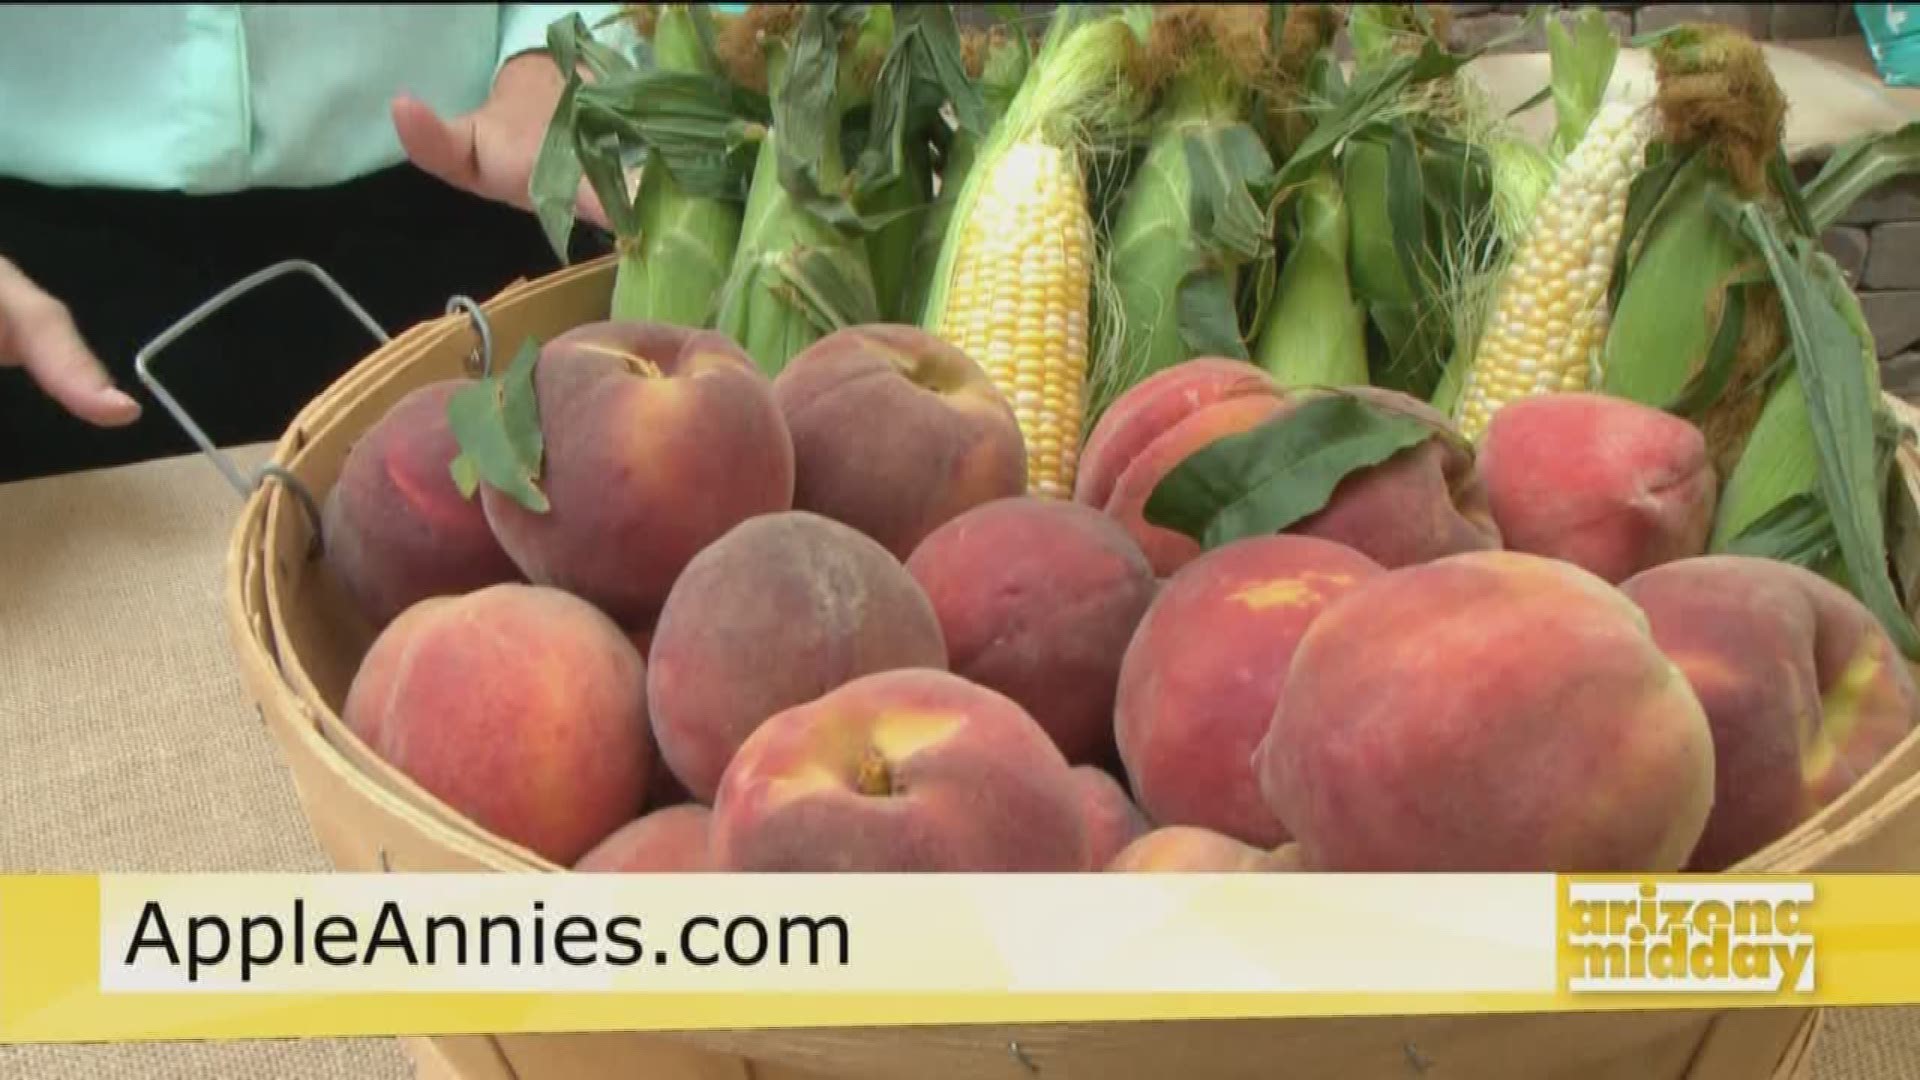 Mandy Kirkendall is giving us the scoop on how to pick some peaches this summer at Apple Annie's Orchard. They also have peachy products for you to enjoy!